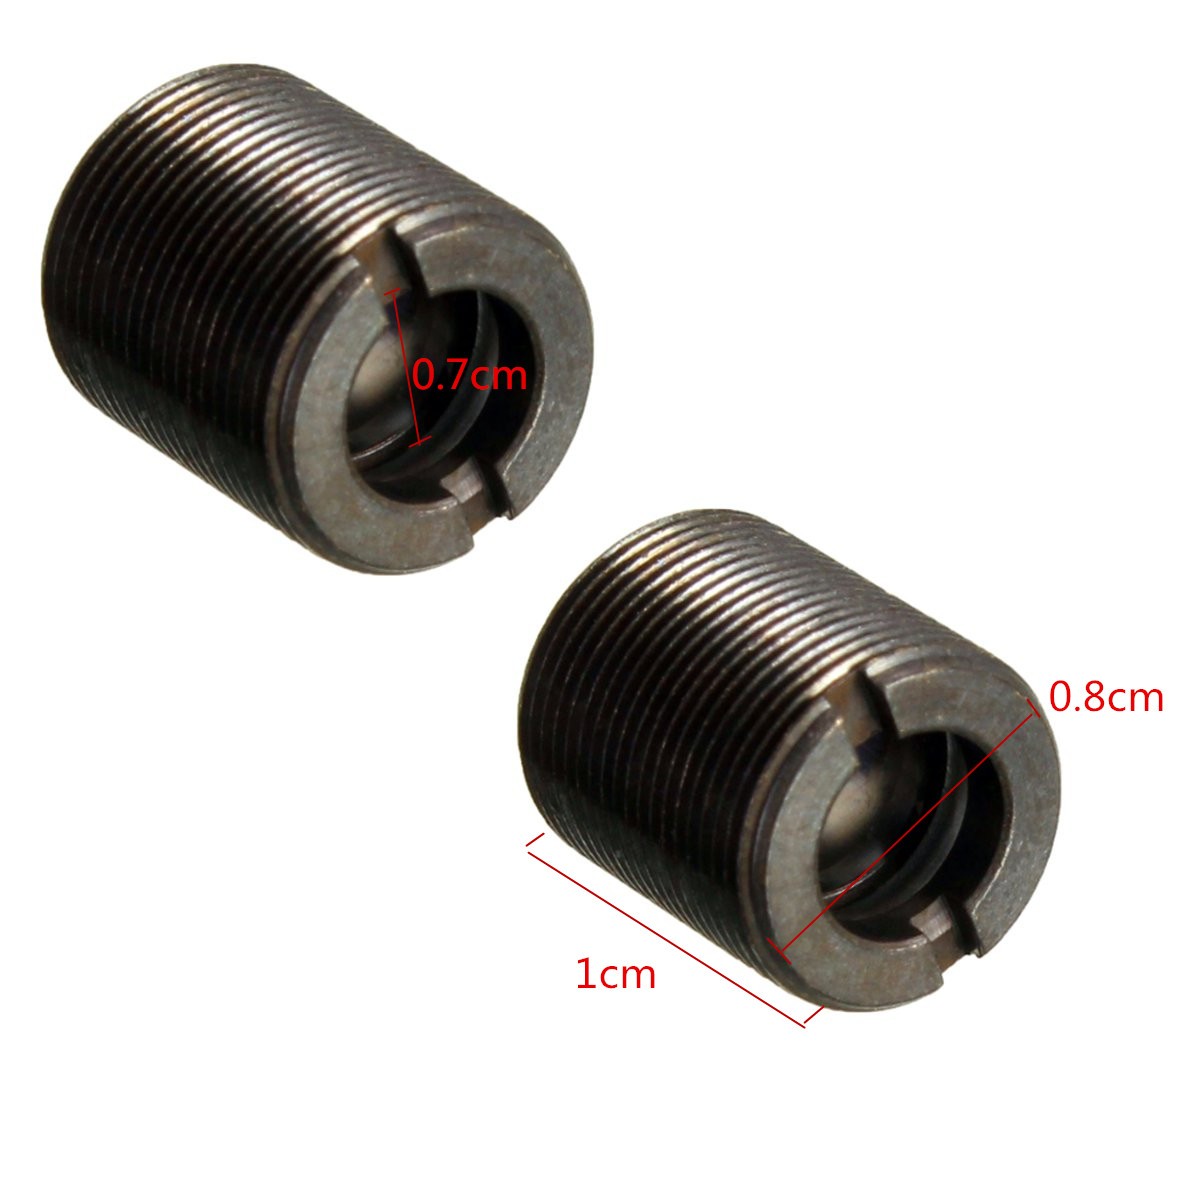 Triple-Glazing-Focusing-Lens-Collimating-Coated-Glass-Lens-Blue-Laser-Diode-405nm-450nm-1035471-7